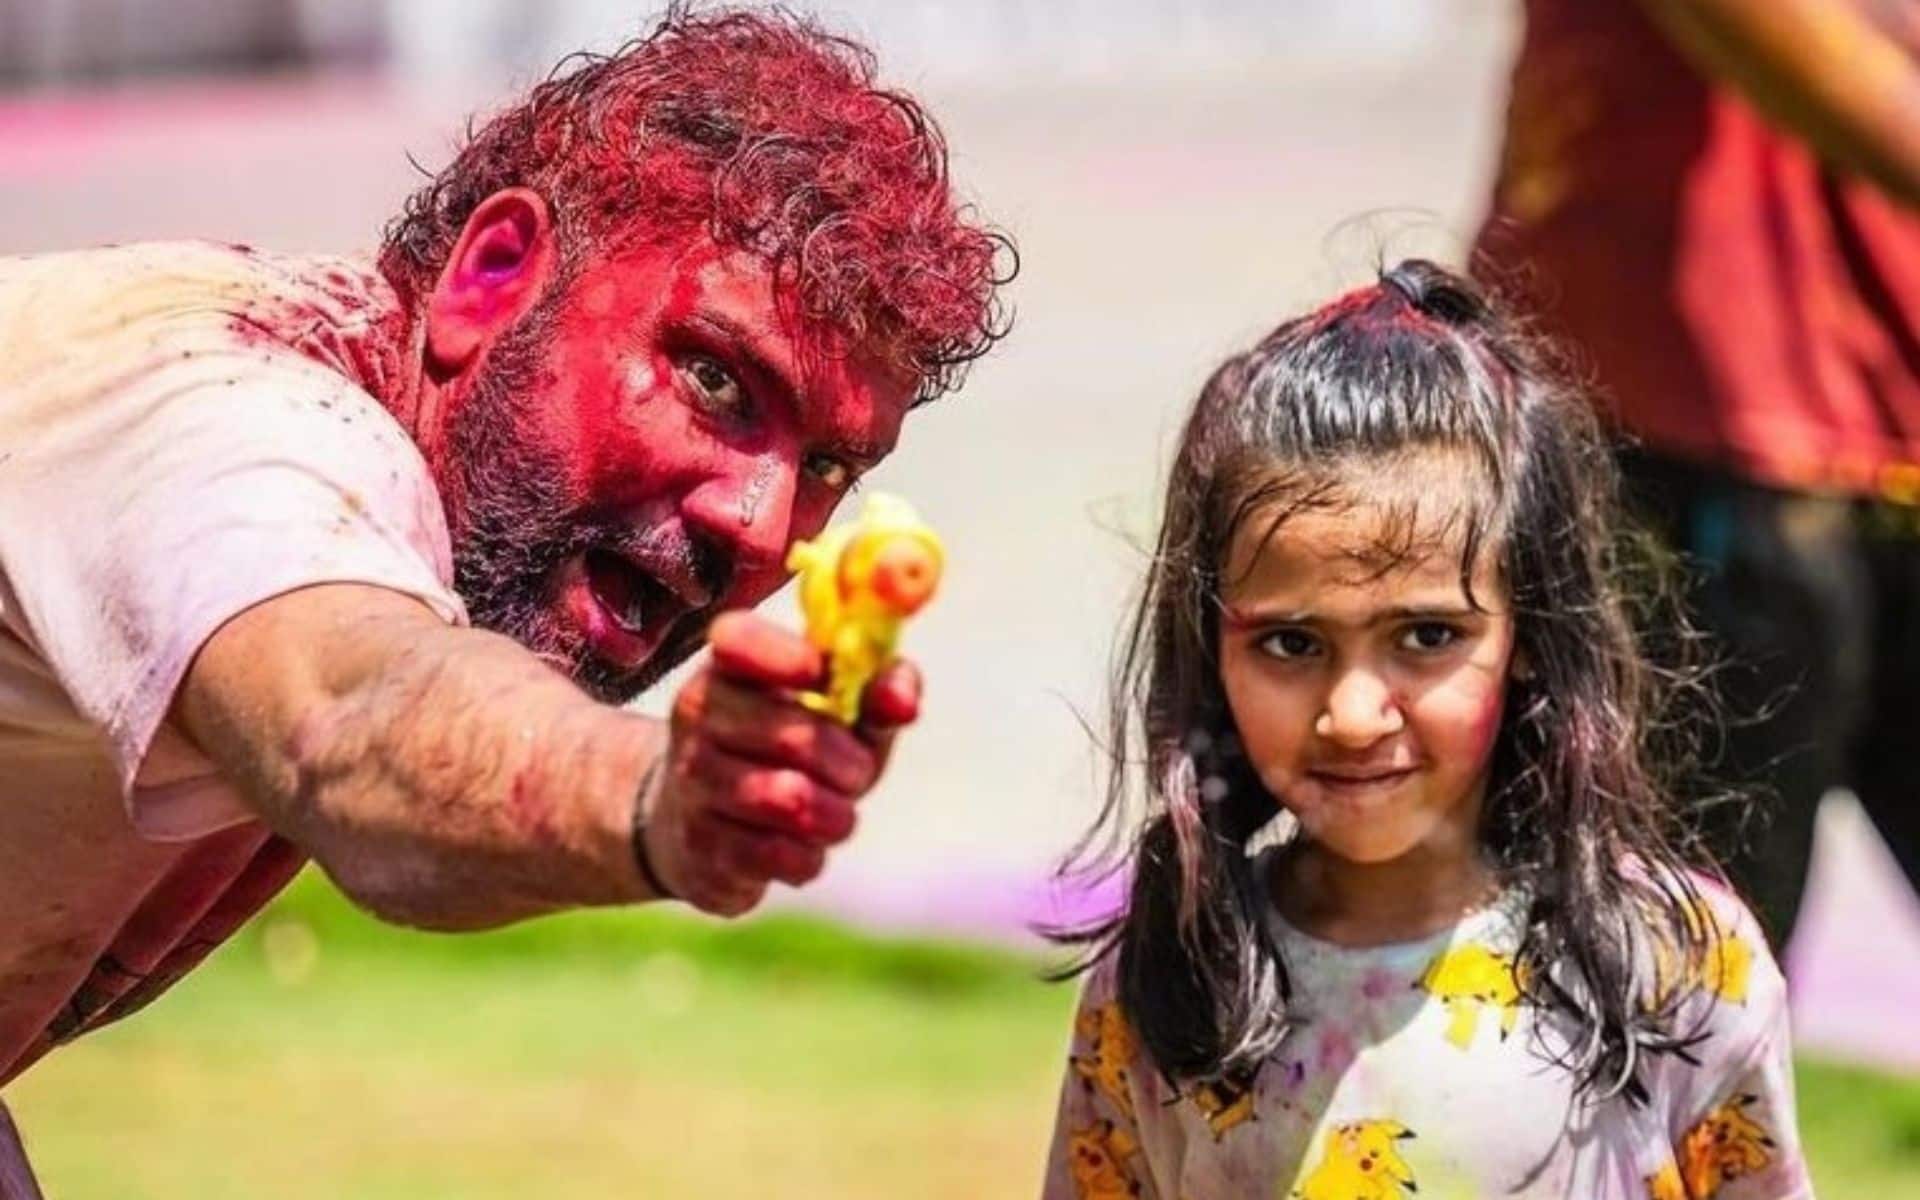 Rohit Sharma with his daughter during Holi celebration (x.com)